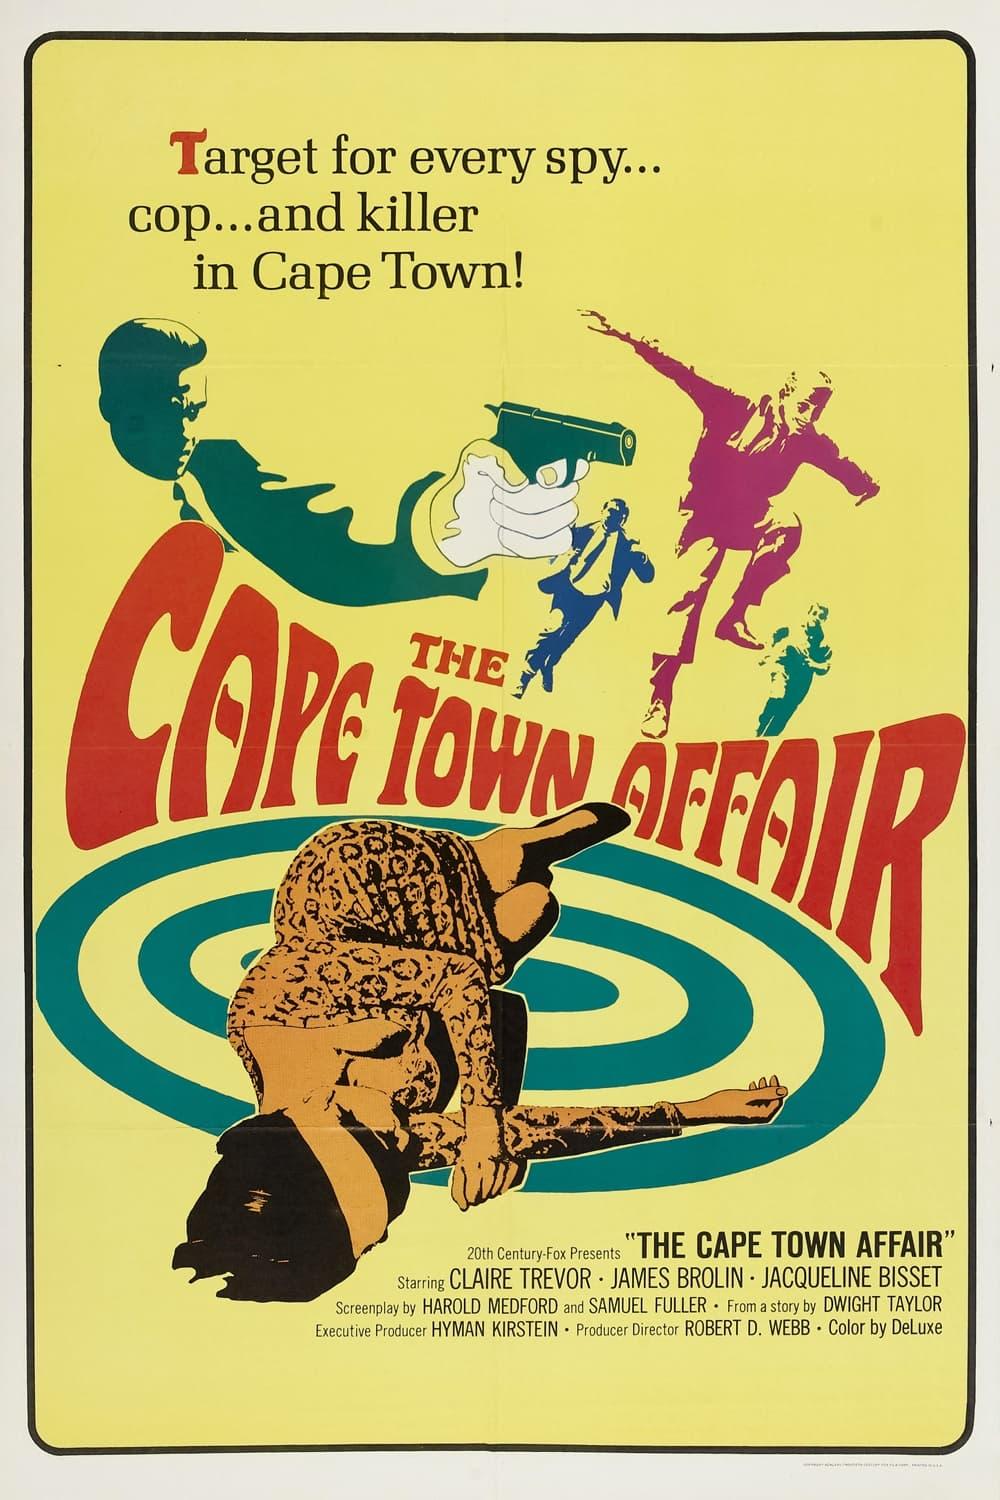 The Cape Town Affair poster